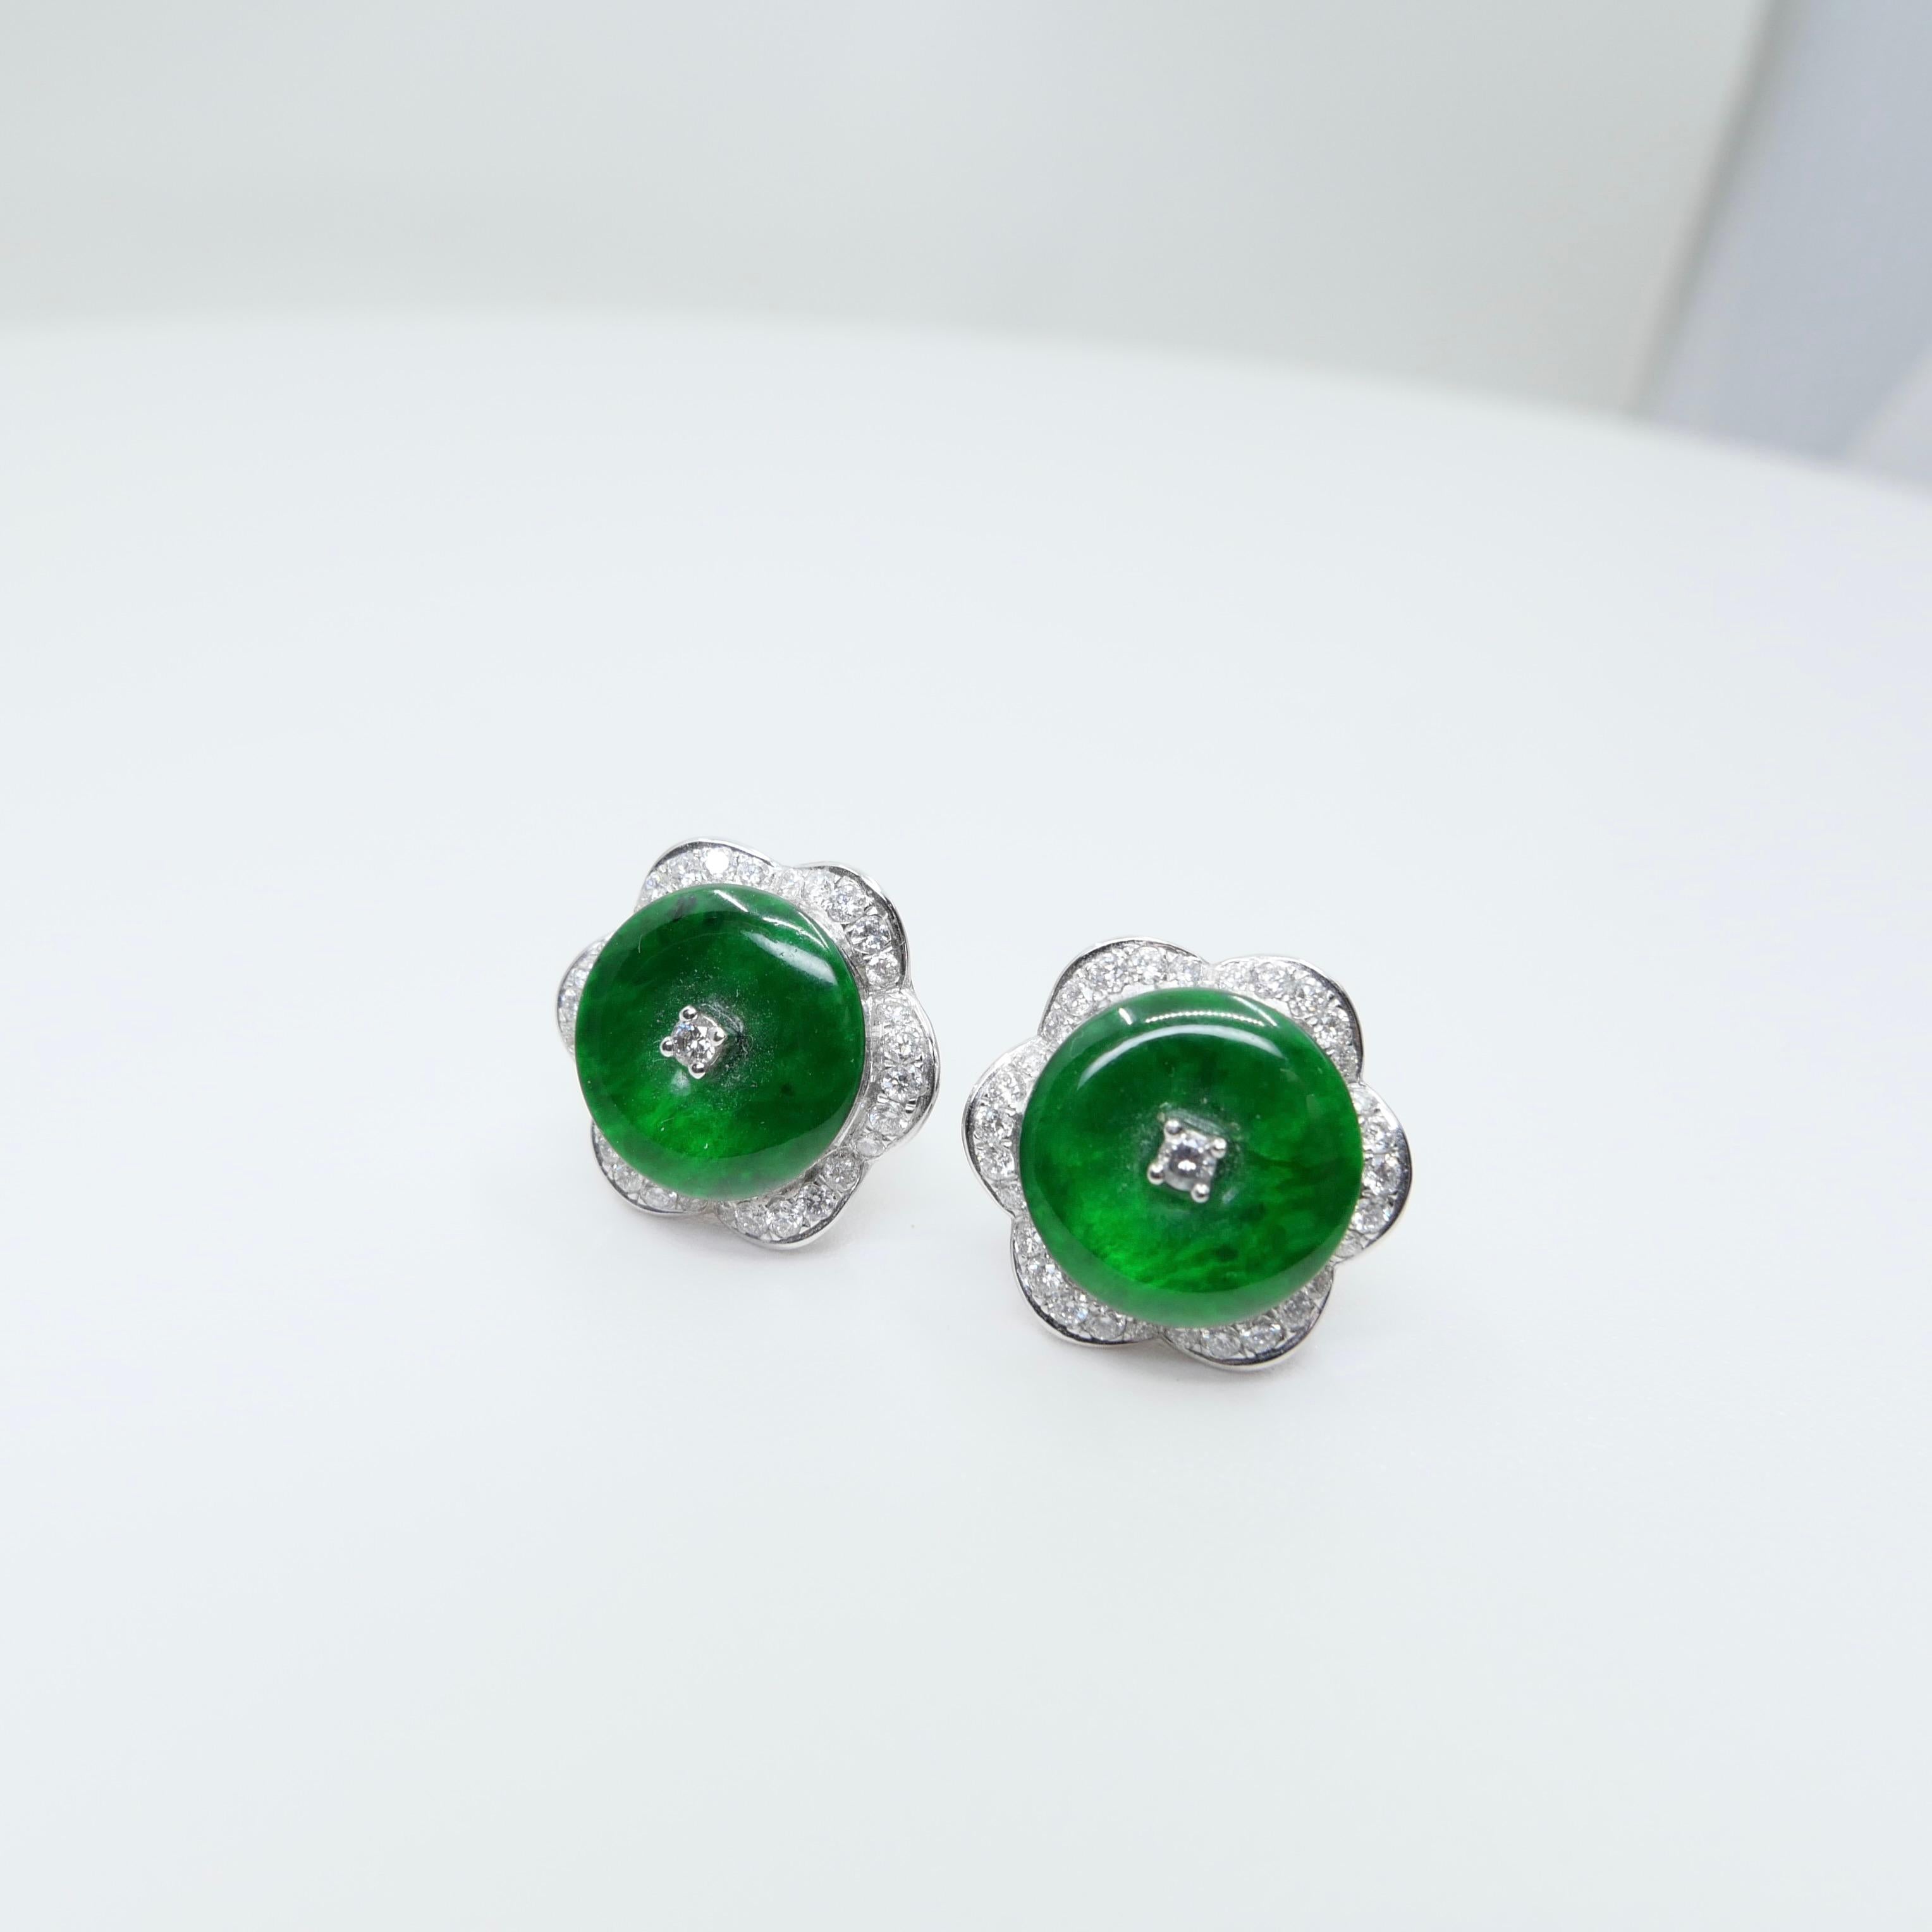 Certified Natural Type A Jadeite Jade And Diamond Earrings. Apple Green Color 4